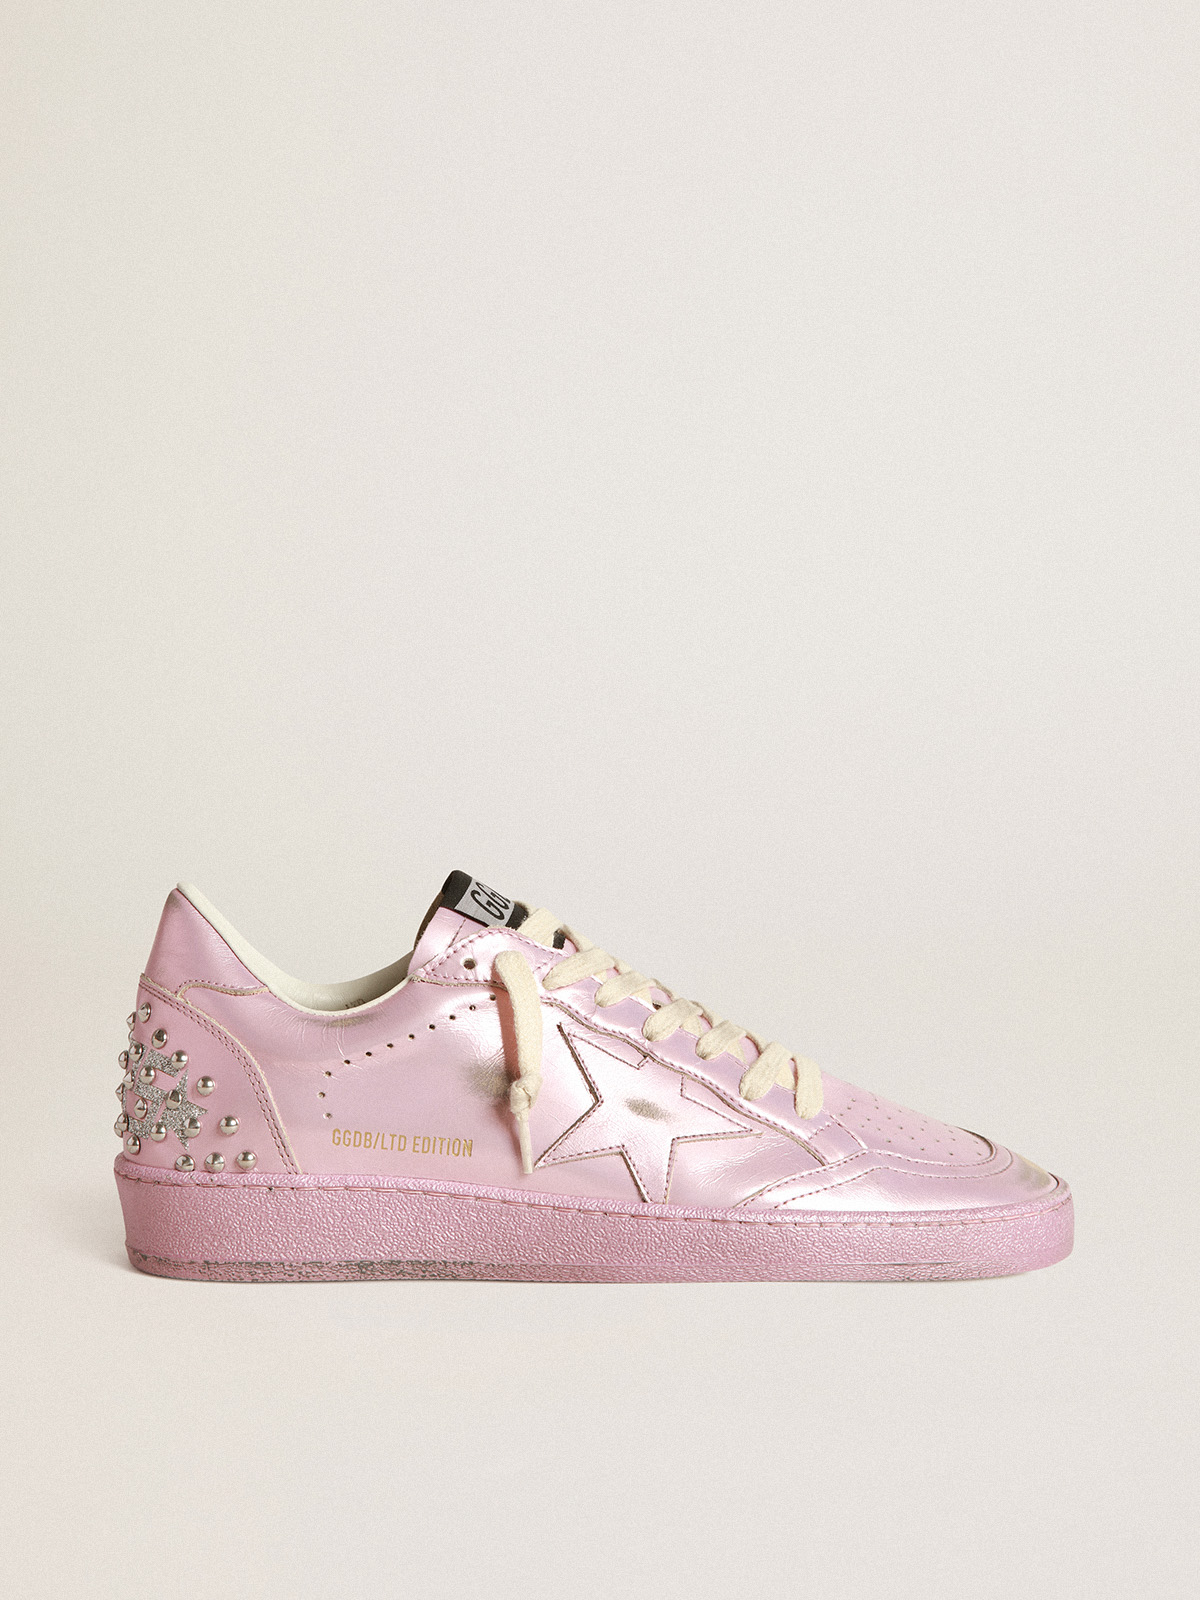 Women\'s Ball Star LAB in pink laminated leather with studs | Golden Goose